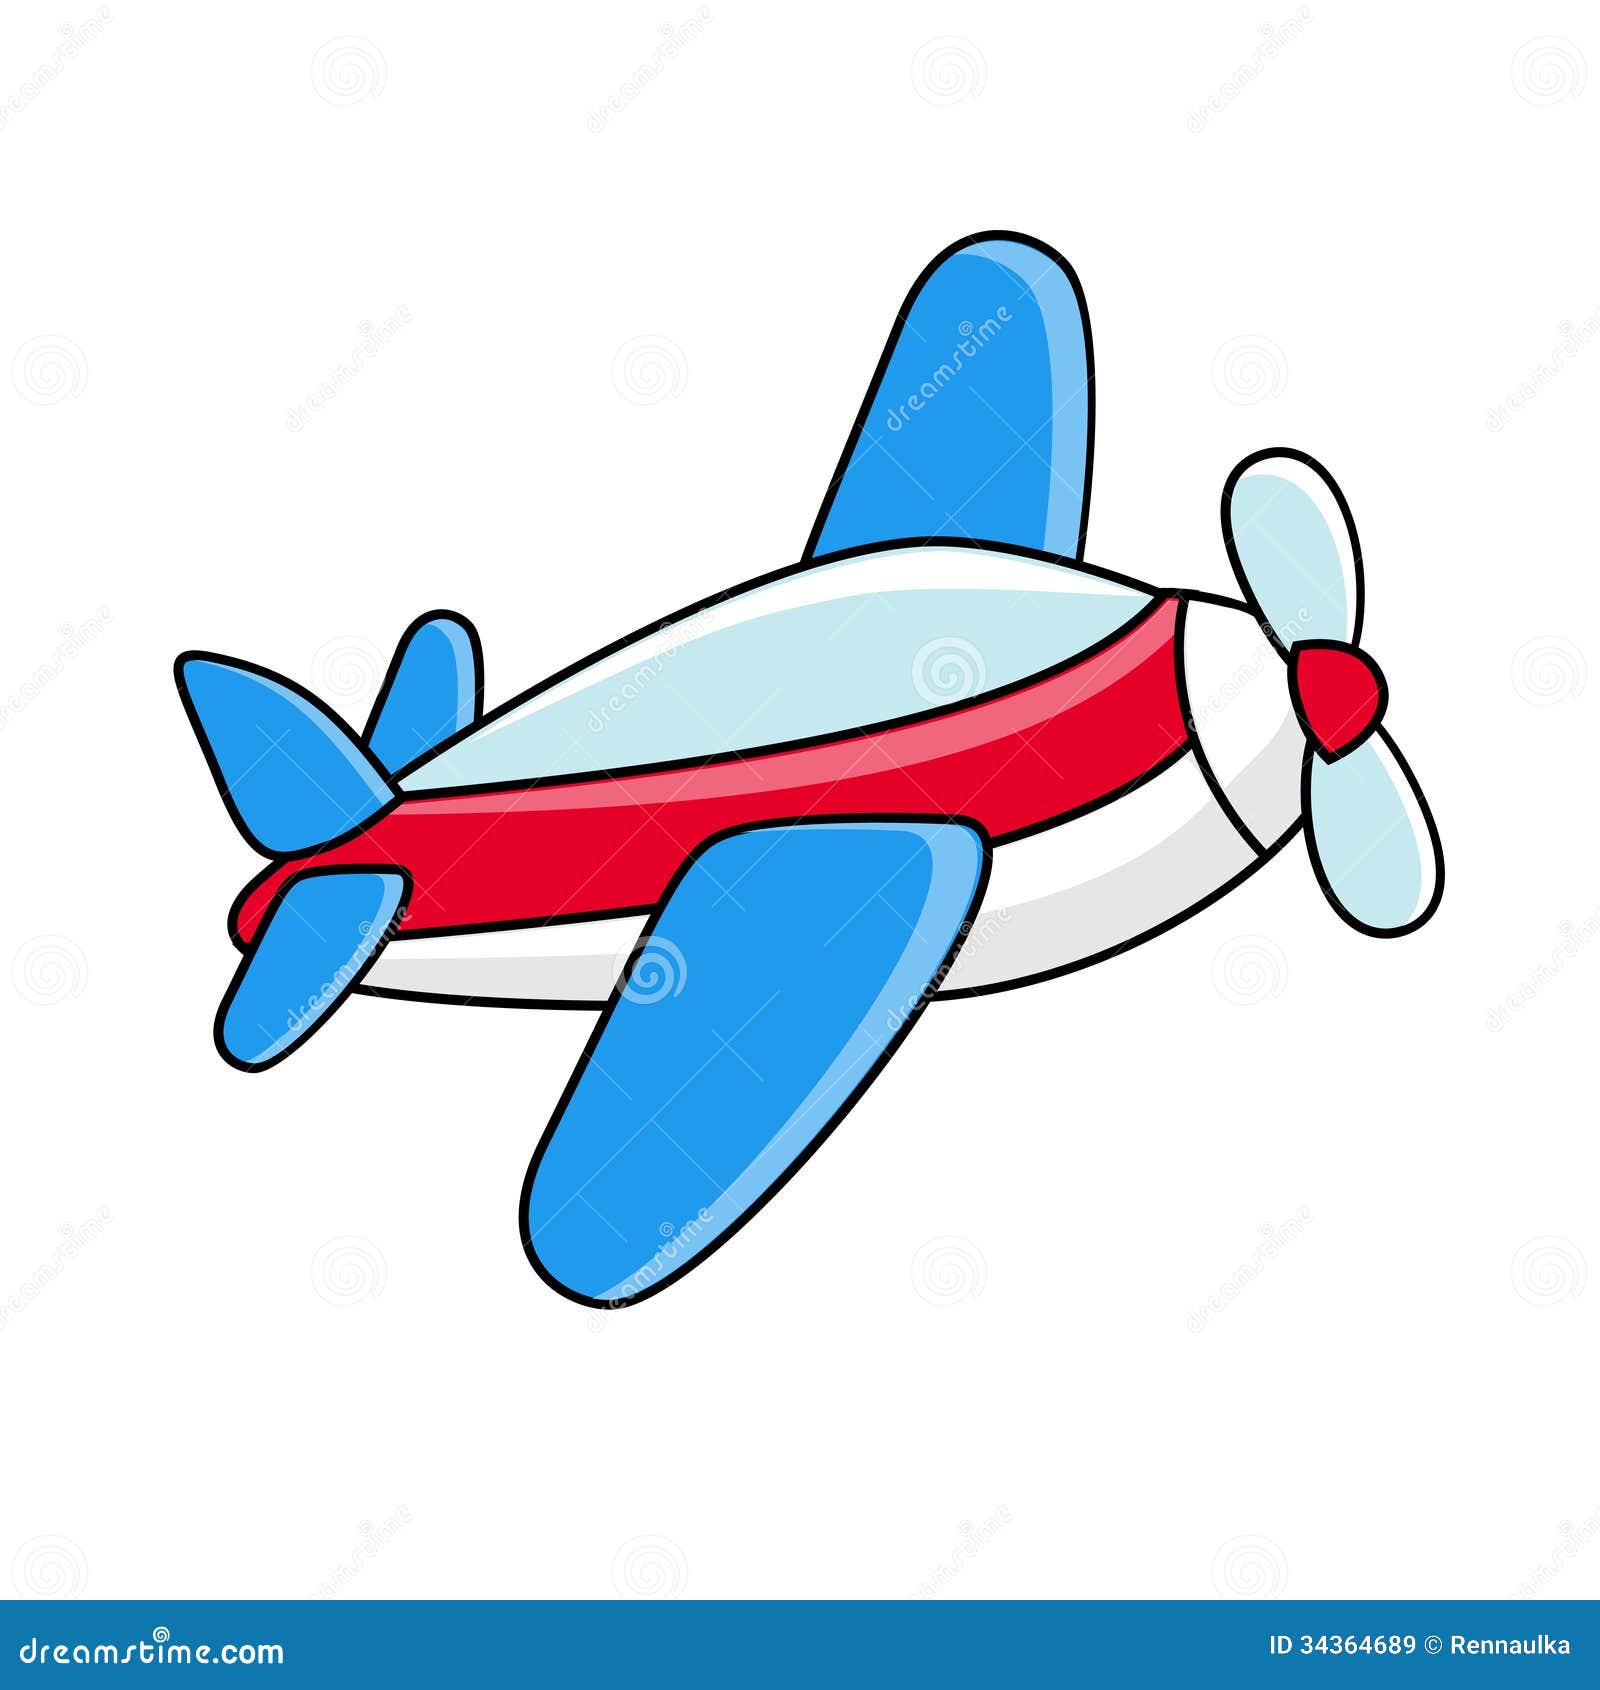 airplane toy clipart - photo #23